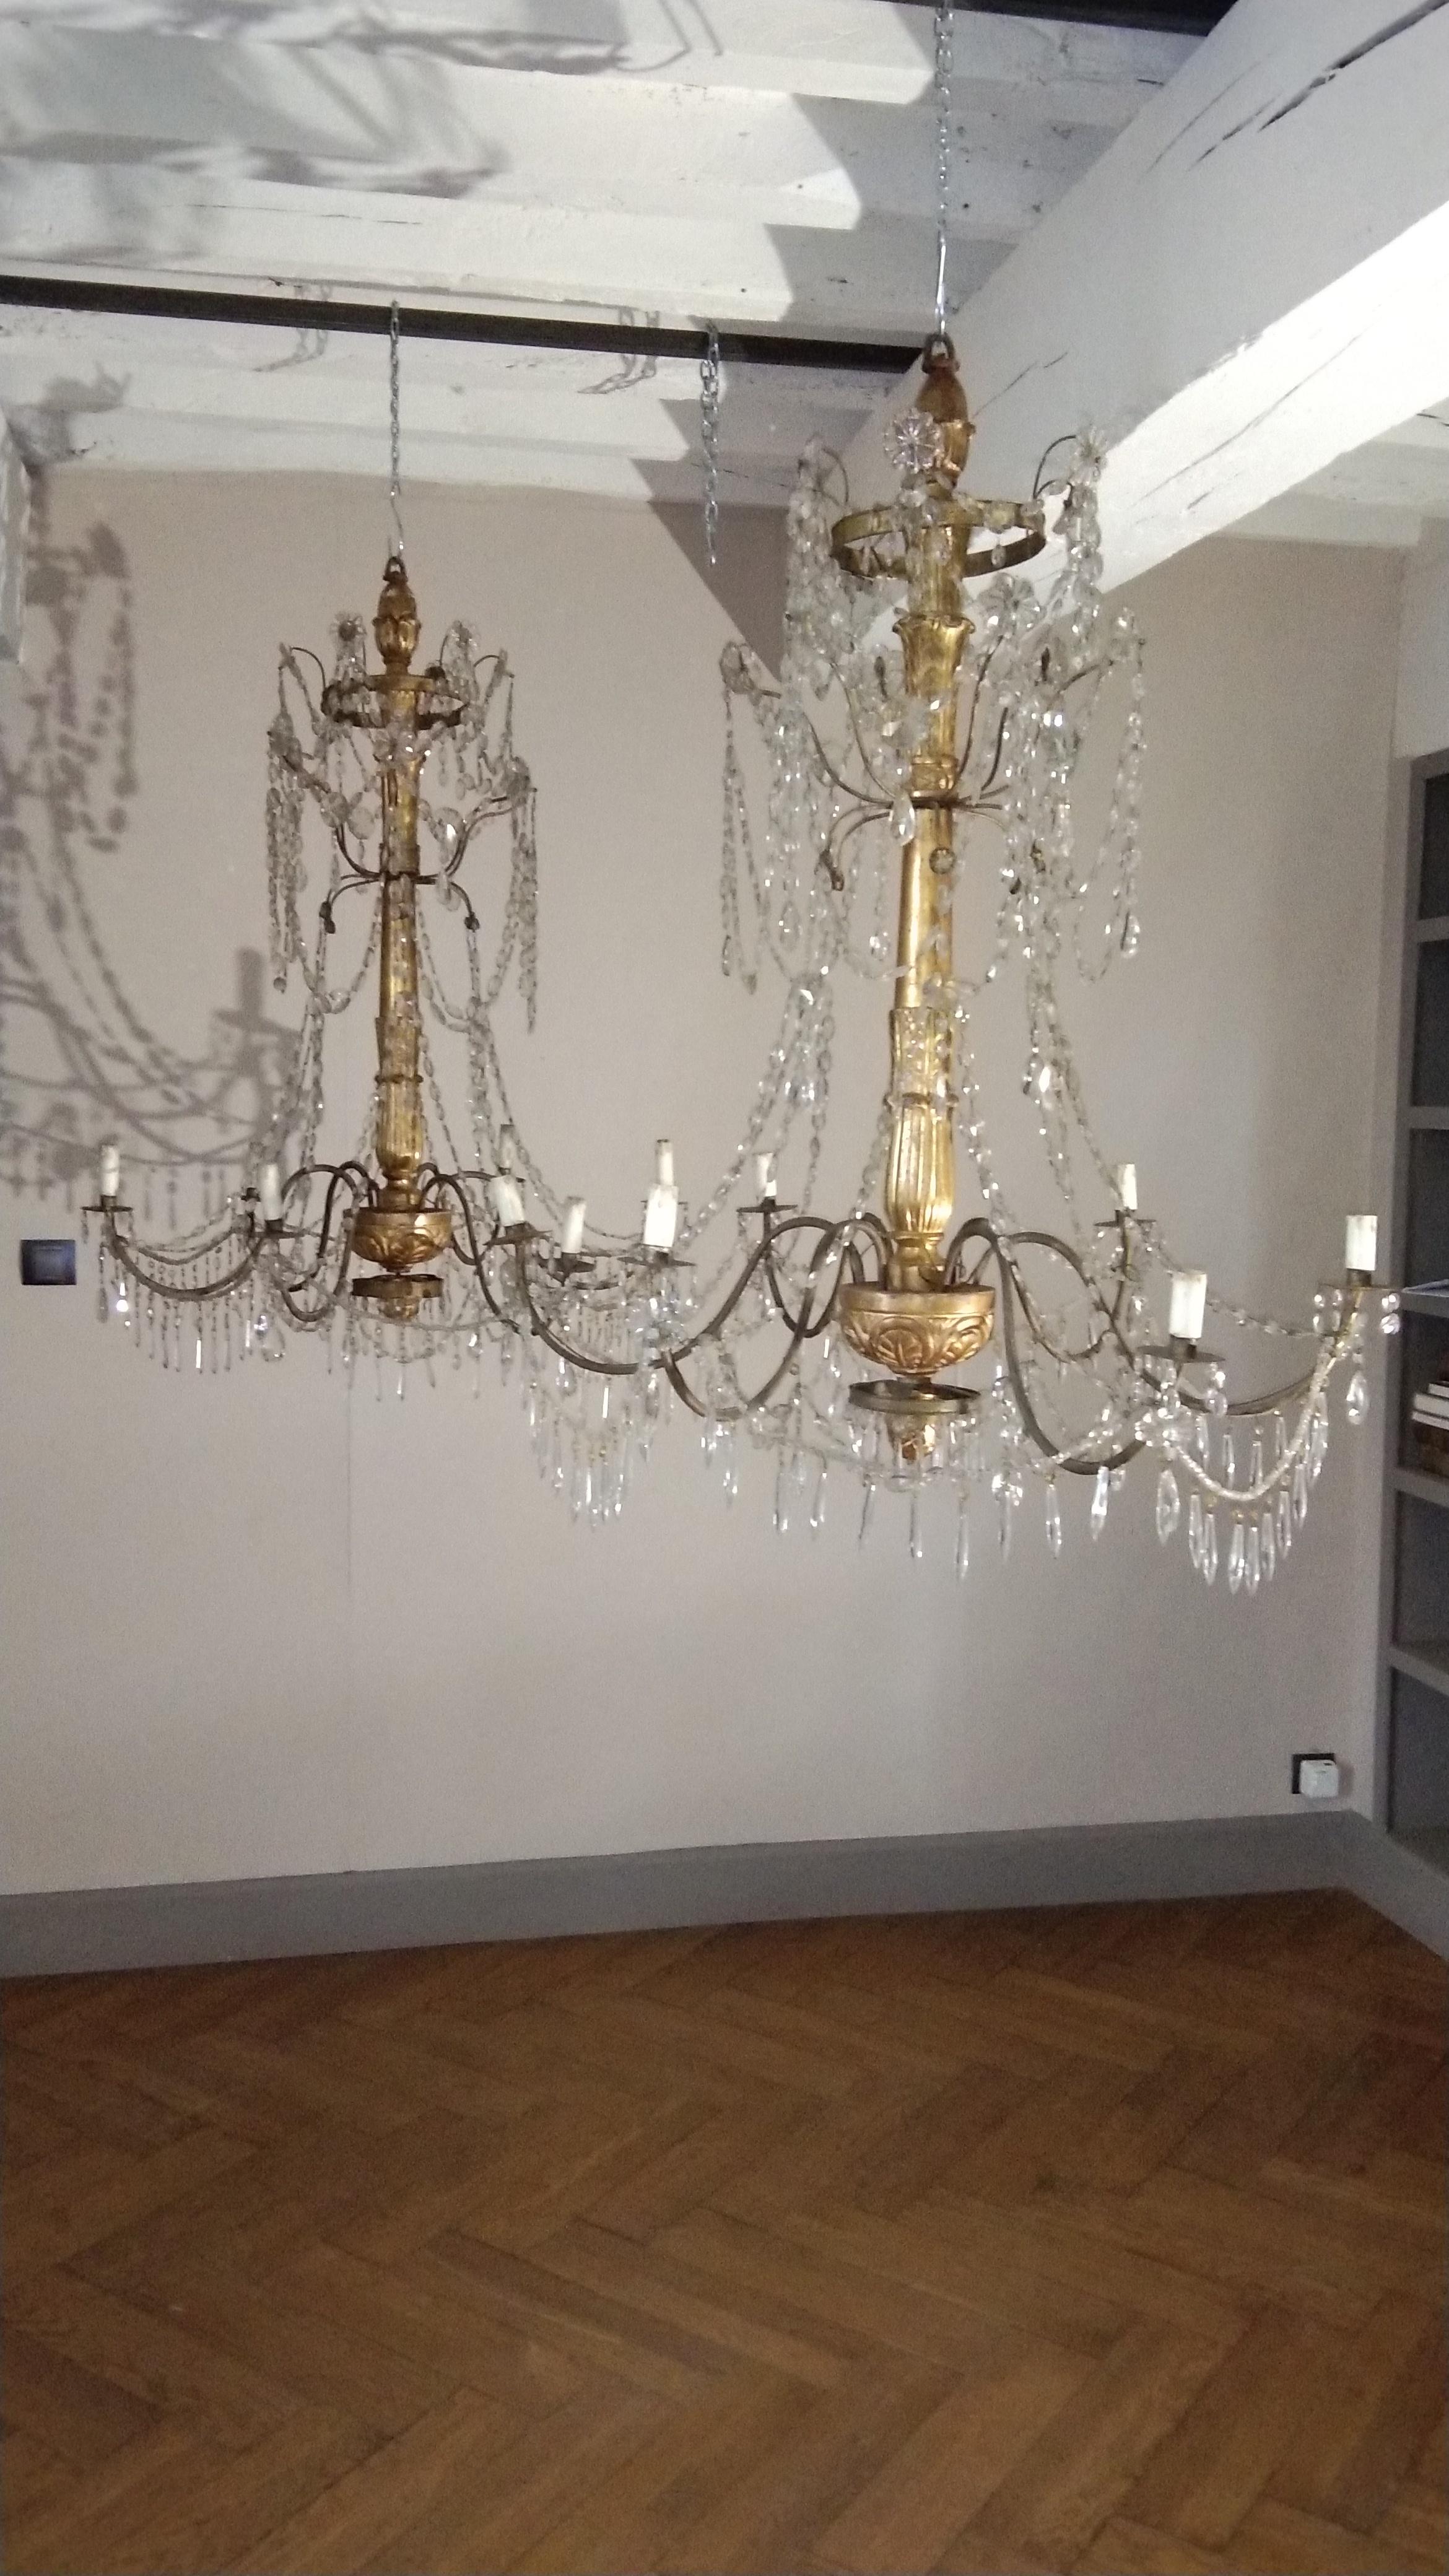 Pair of 18th century Italian giltwood and beaded crystal chandeliers from Italy

A pair of late 18th century wooden carved and giltwood chandeliers composed of six arms with original gilt. Originally candle powered and have been electrified to